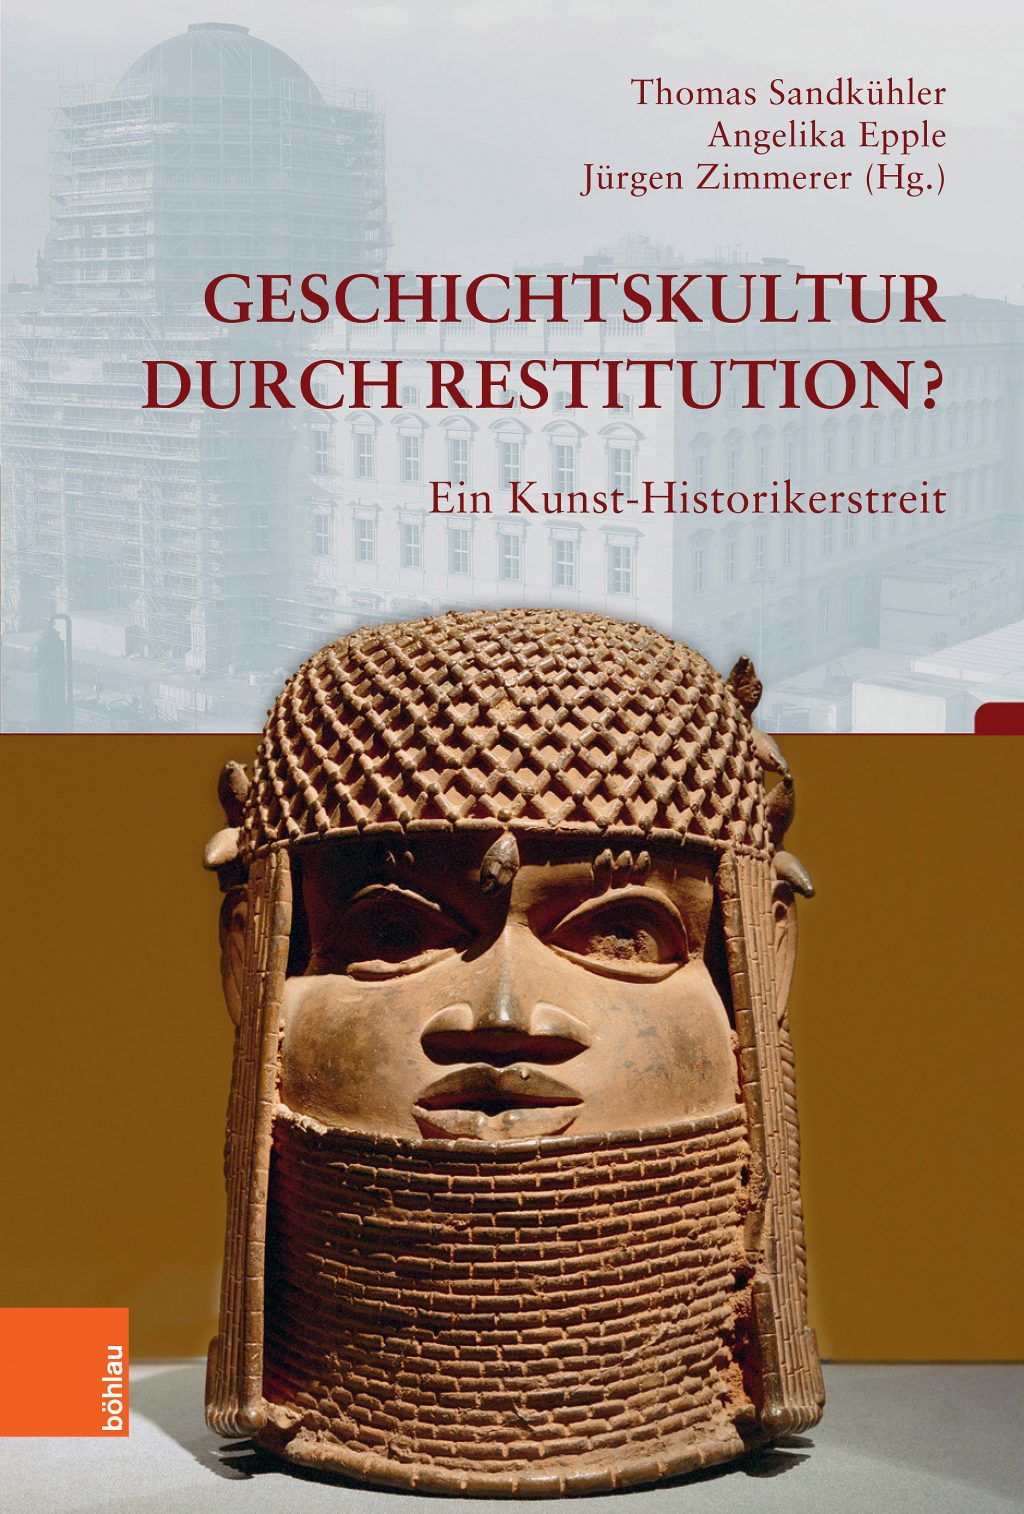 Book review on "Culture of History by Response?"